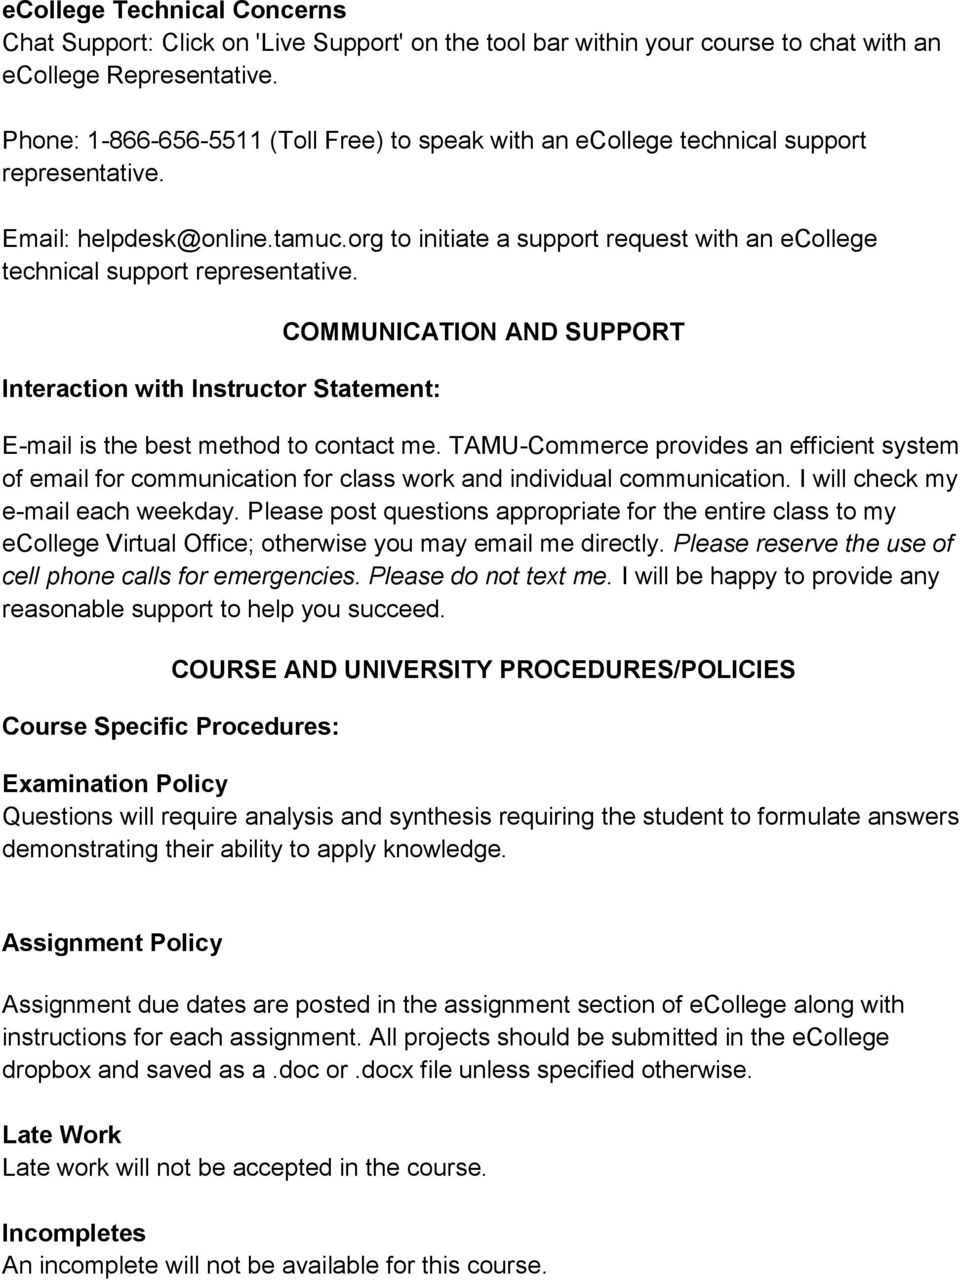 org to initiate a support request with an ecollege technical support representative. Interaction with Instructor Statement: COMMUNICATION AND SUPPORT E-mail is the best method to contact me.